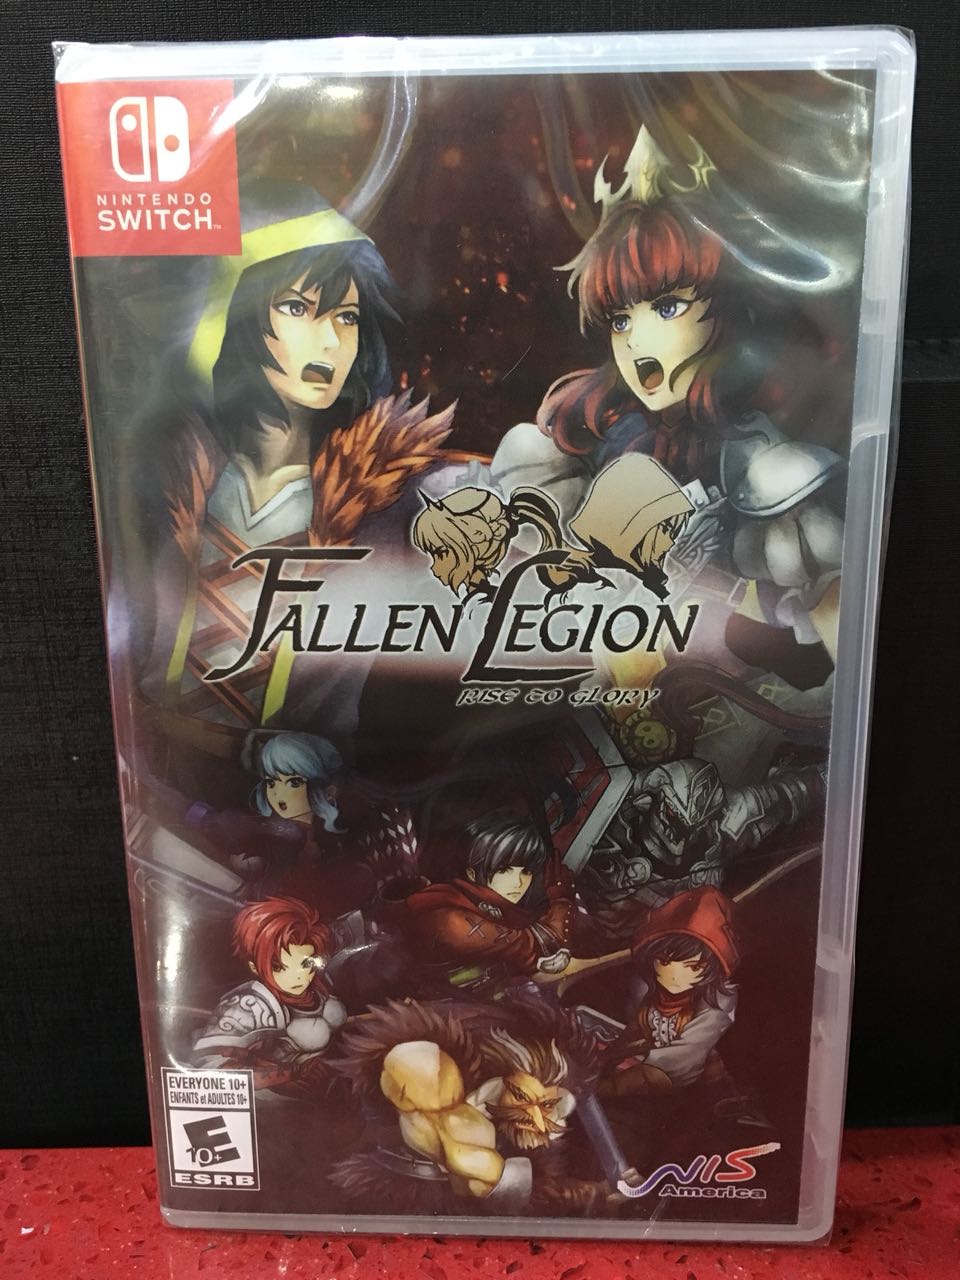 Fallen Legion: Rise to Glory for apple download